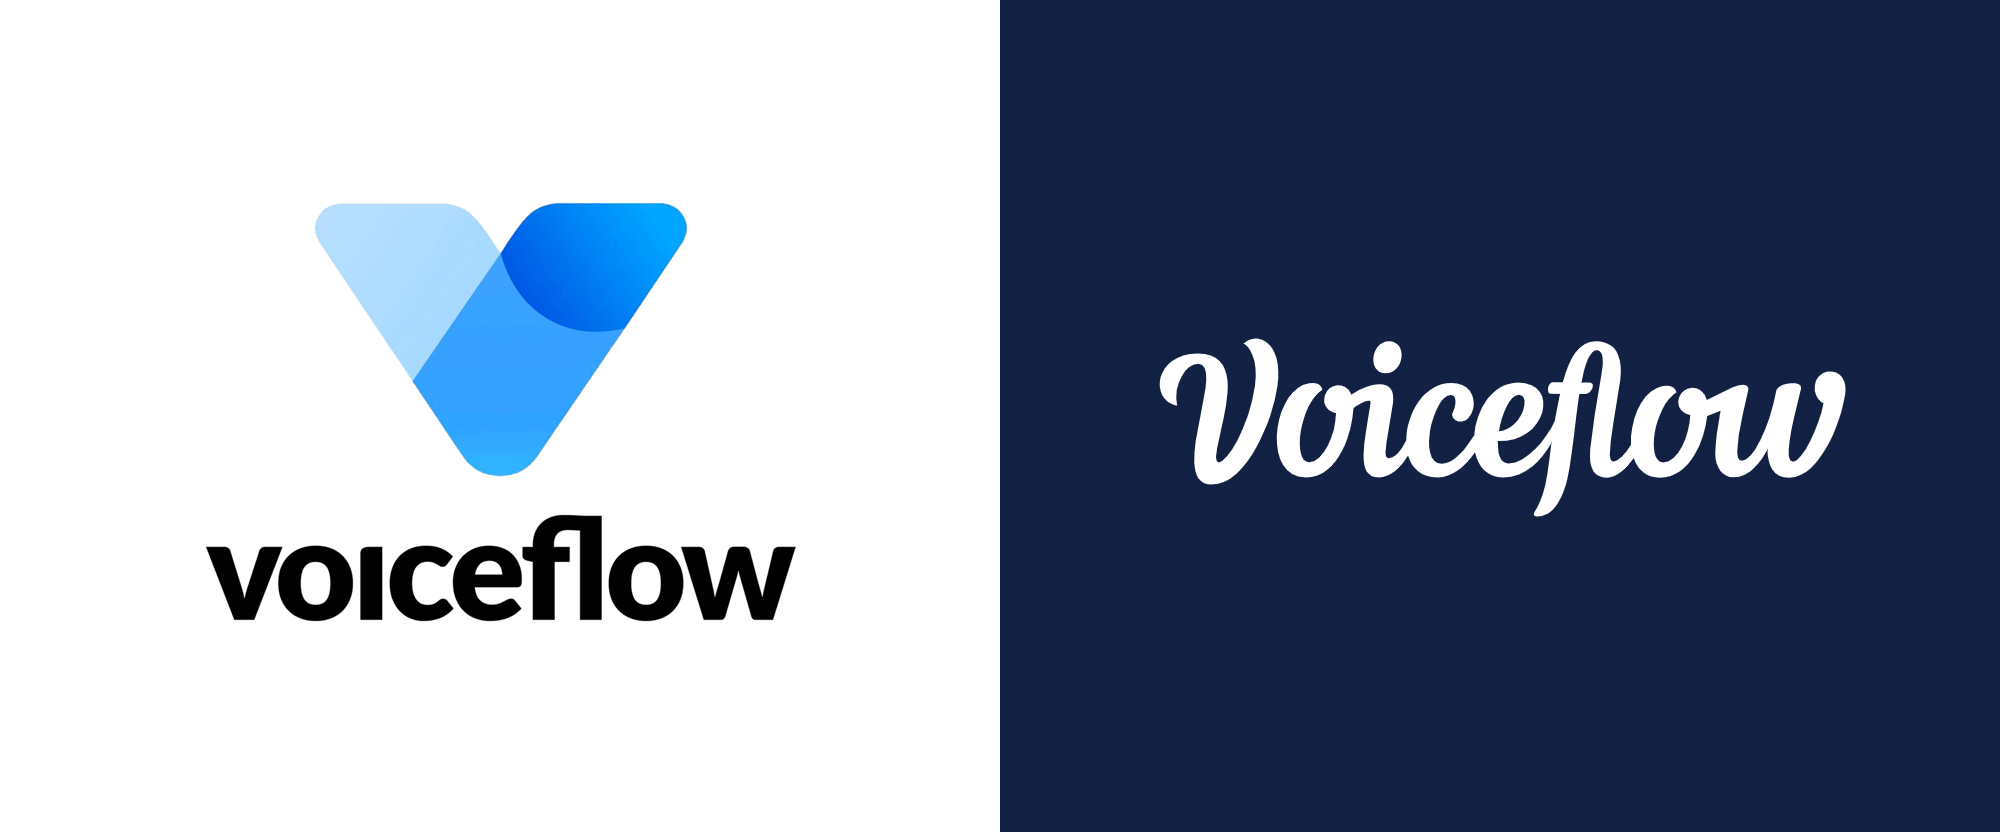 Lance Logo - Brand New: New Logo for Voiceflow by Lance